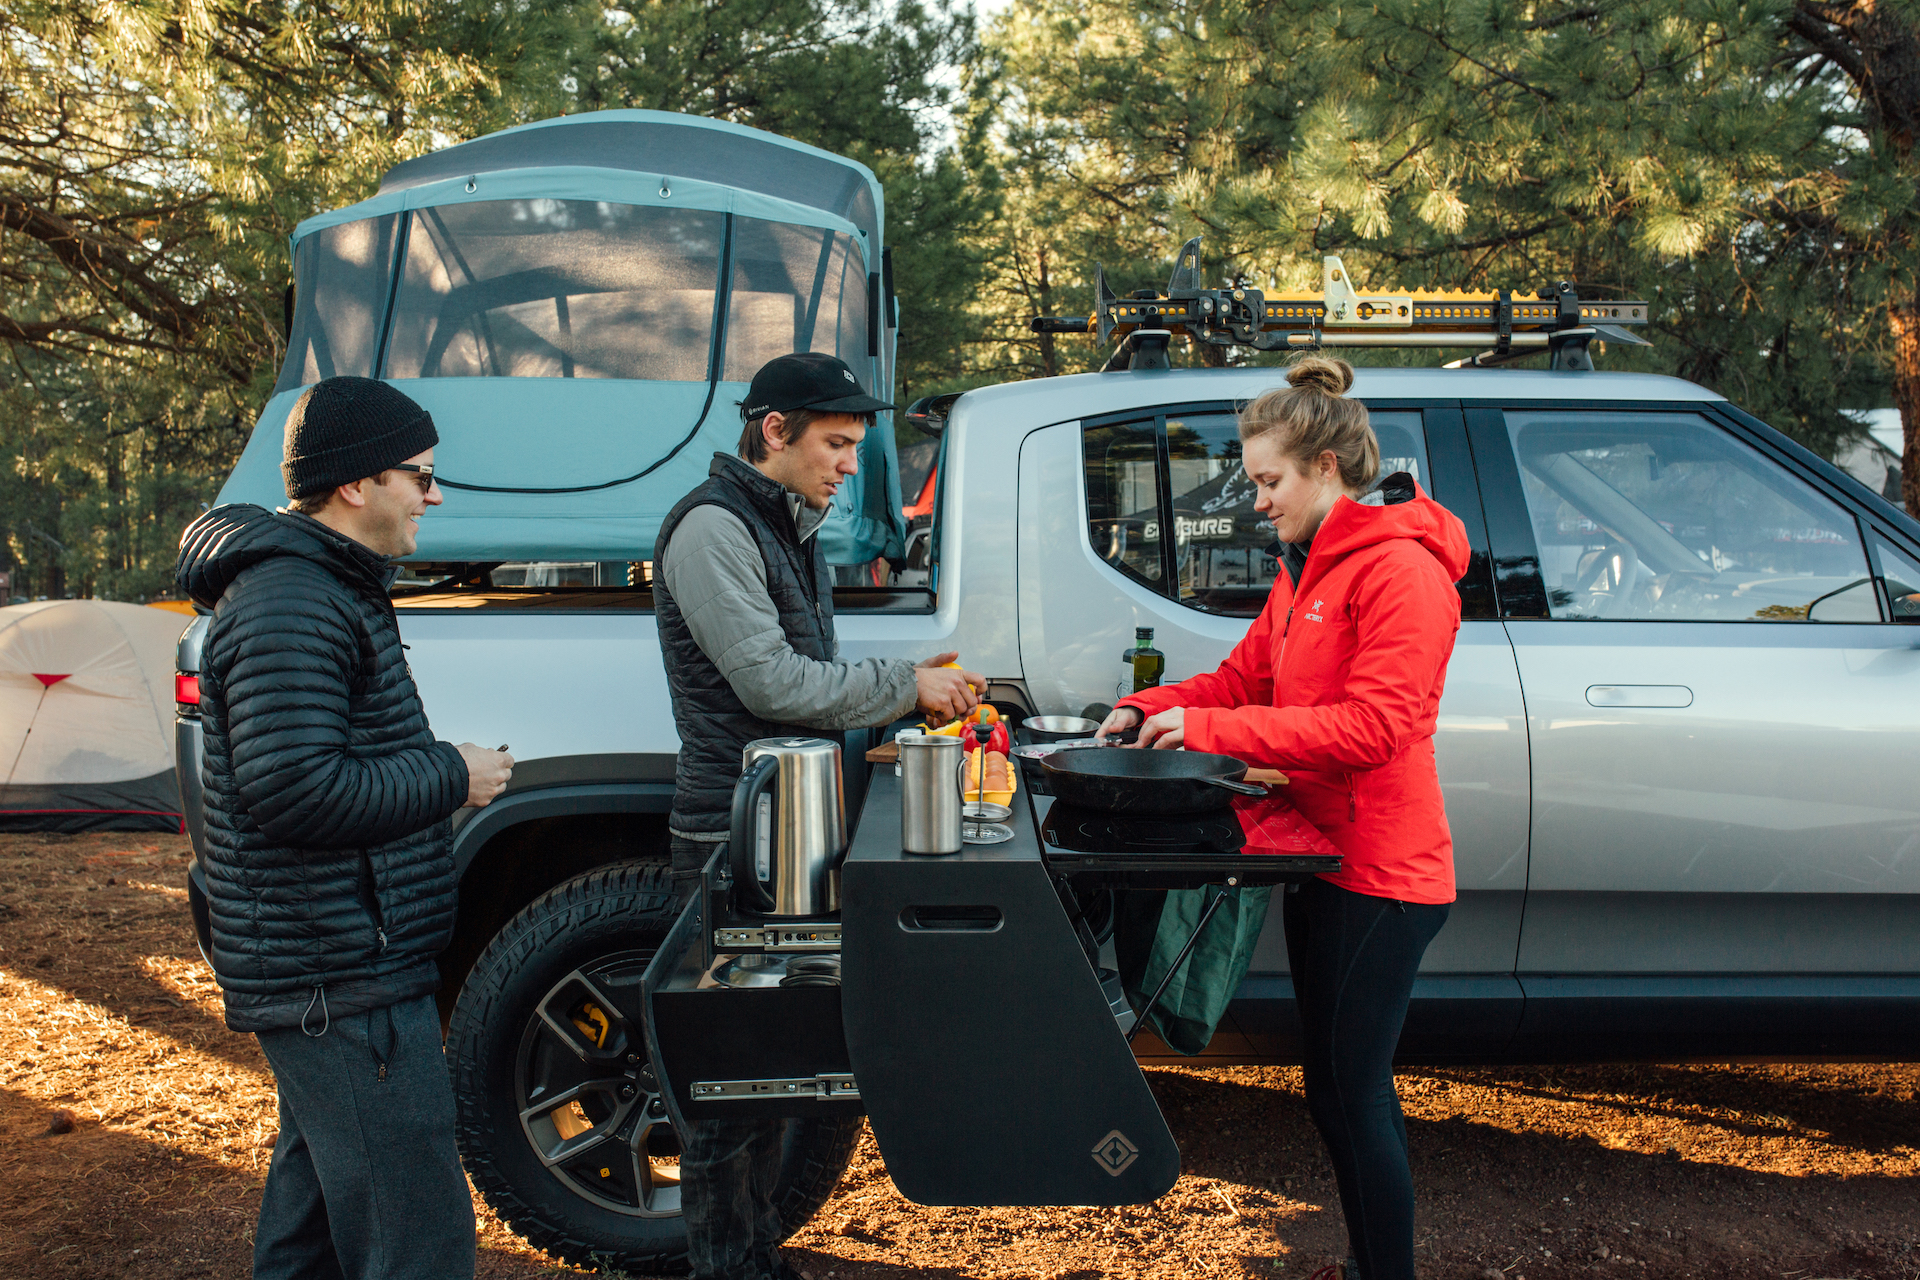 Rivian Removes the Camp Kitchen From Its Gear Shop, It's the End